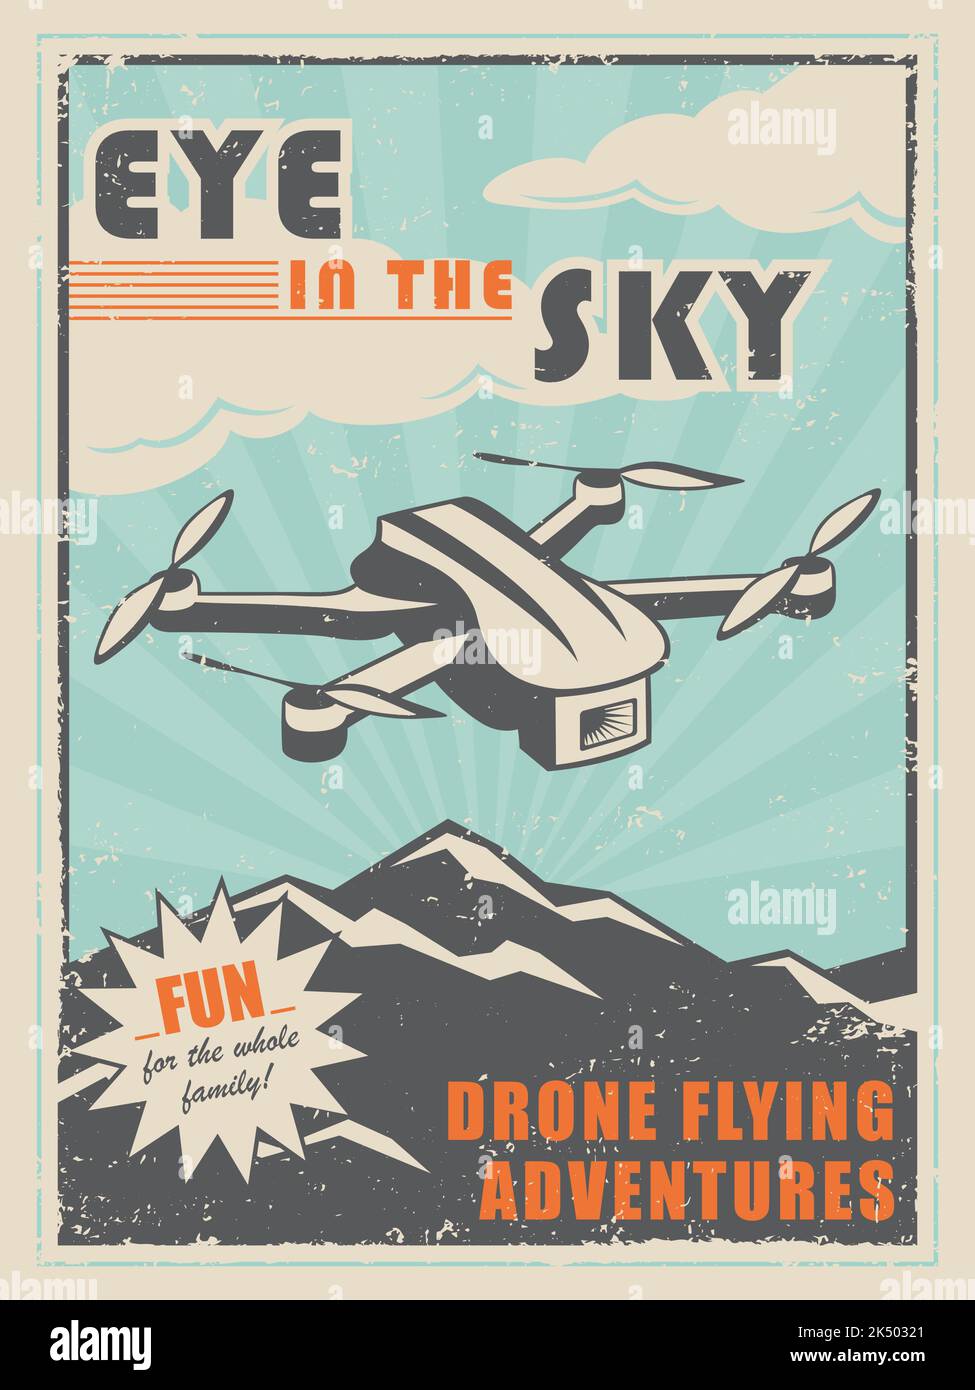 A vintage style poster advertisement for an electronic drone Stock Vector